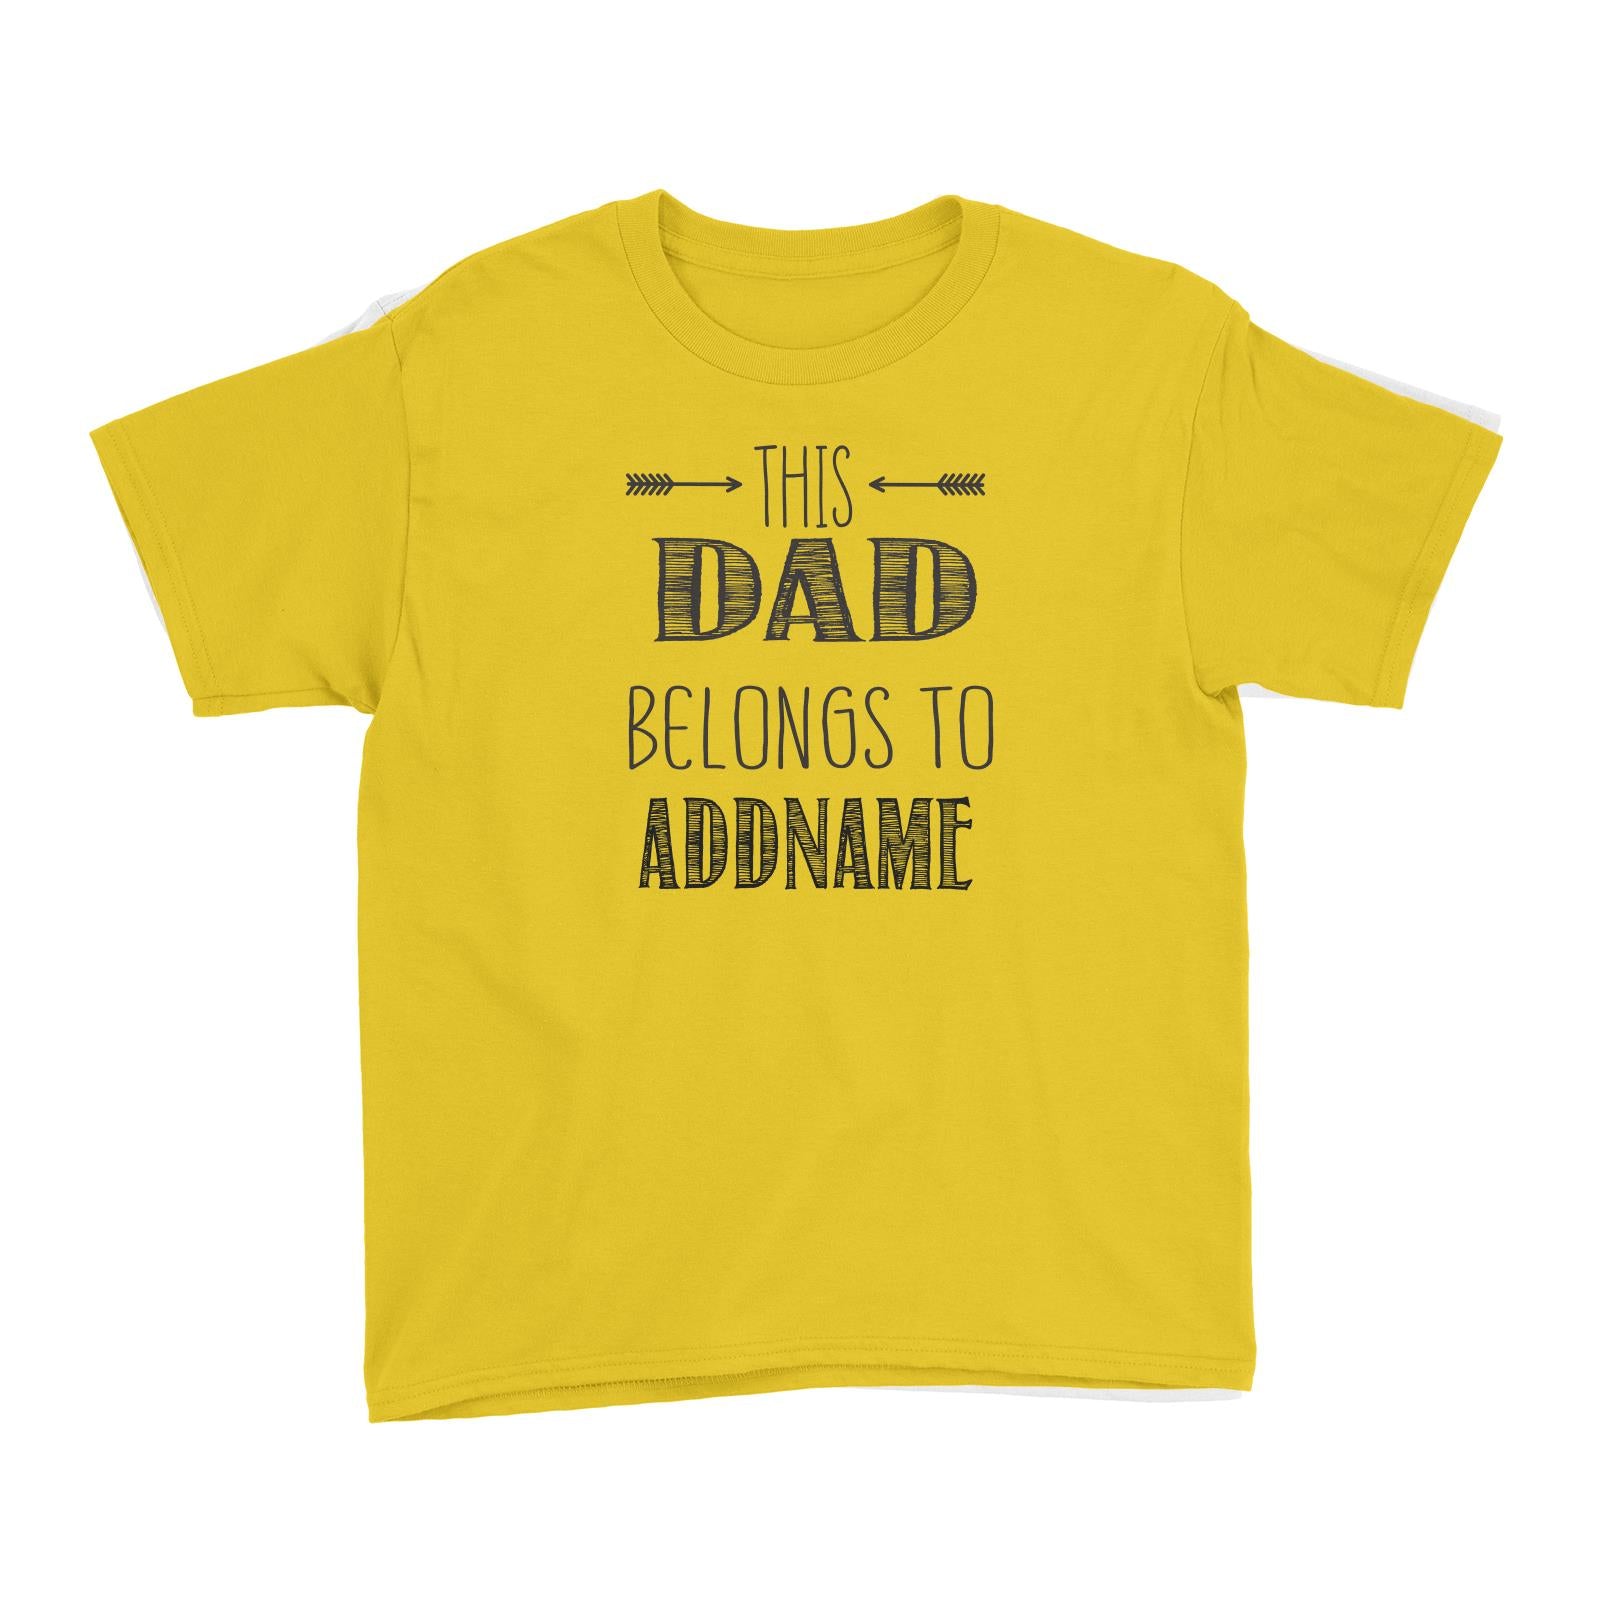 This Dad Belongs to Addname Kid's T-Shirt